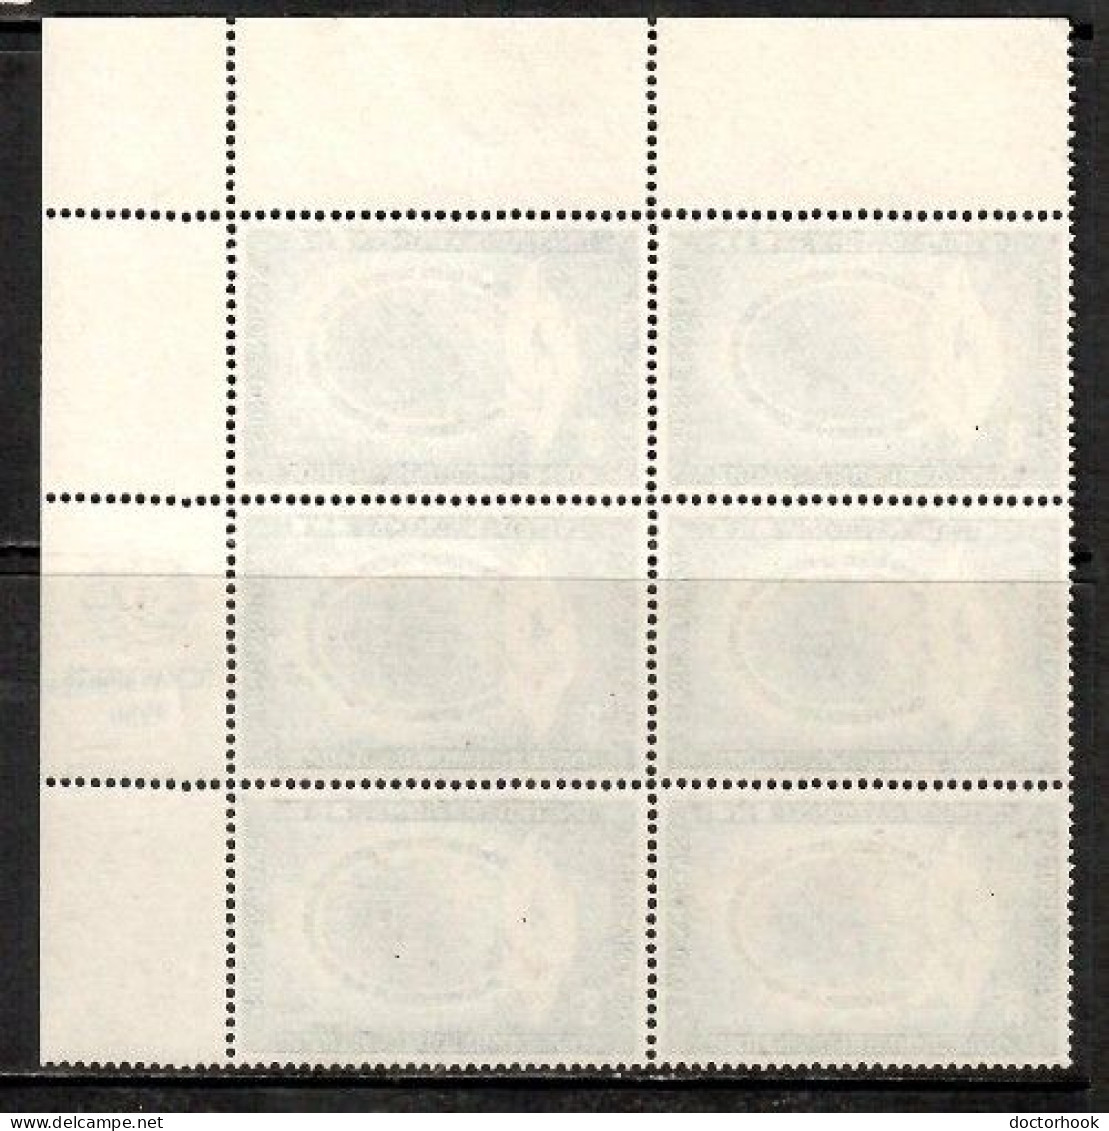 UNITED NATIONS---N.Y.  Scott # 48** MINT NH INSCRIPTION BLOCK Of 6 (CONDITION AS PER SCAN) (LG-1697) - Unused Stamps